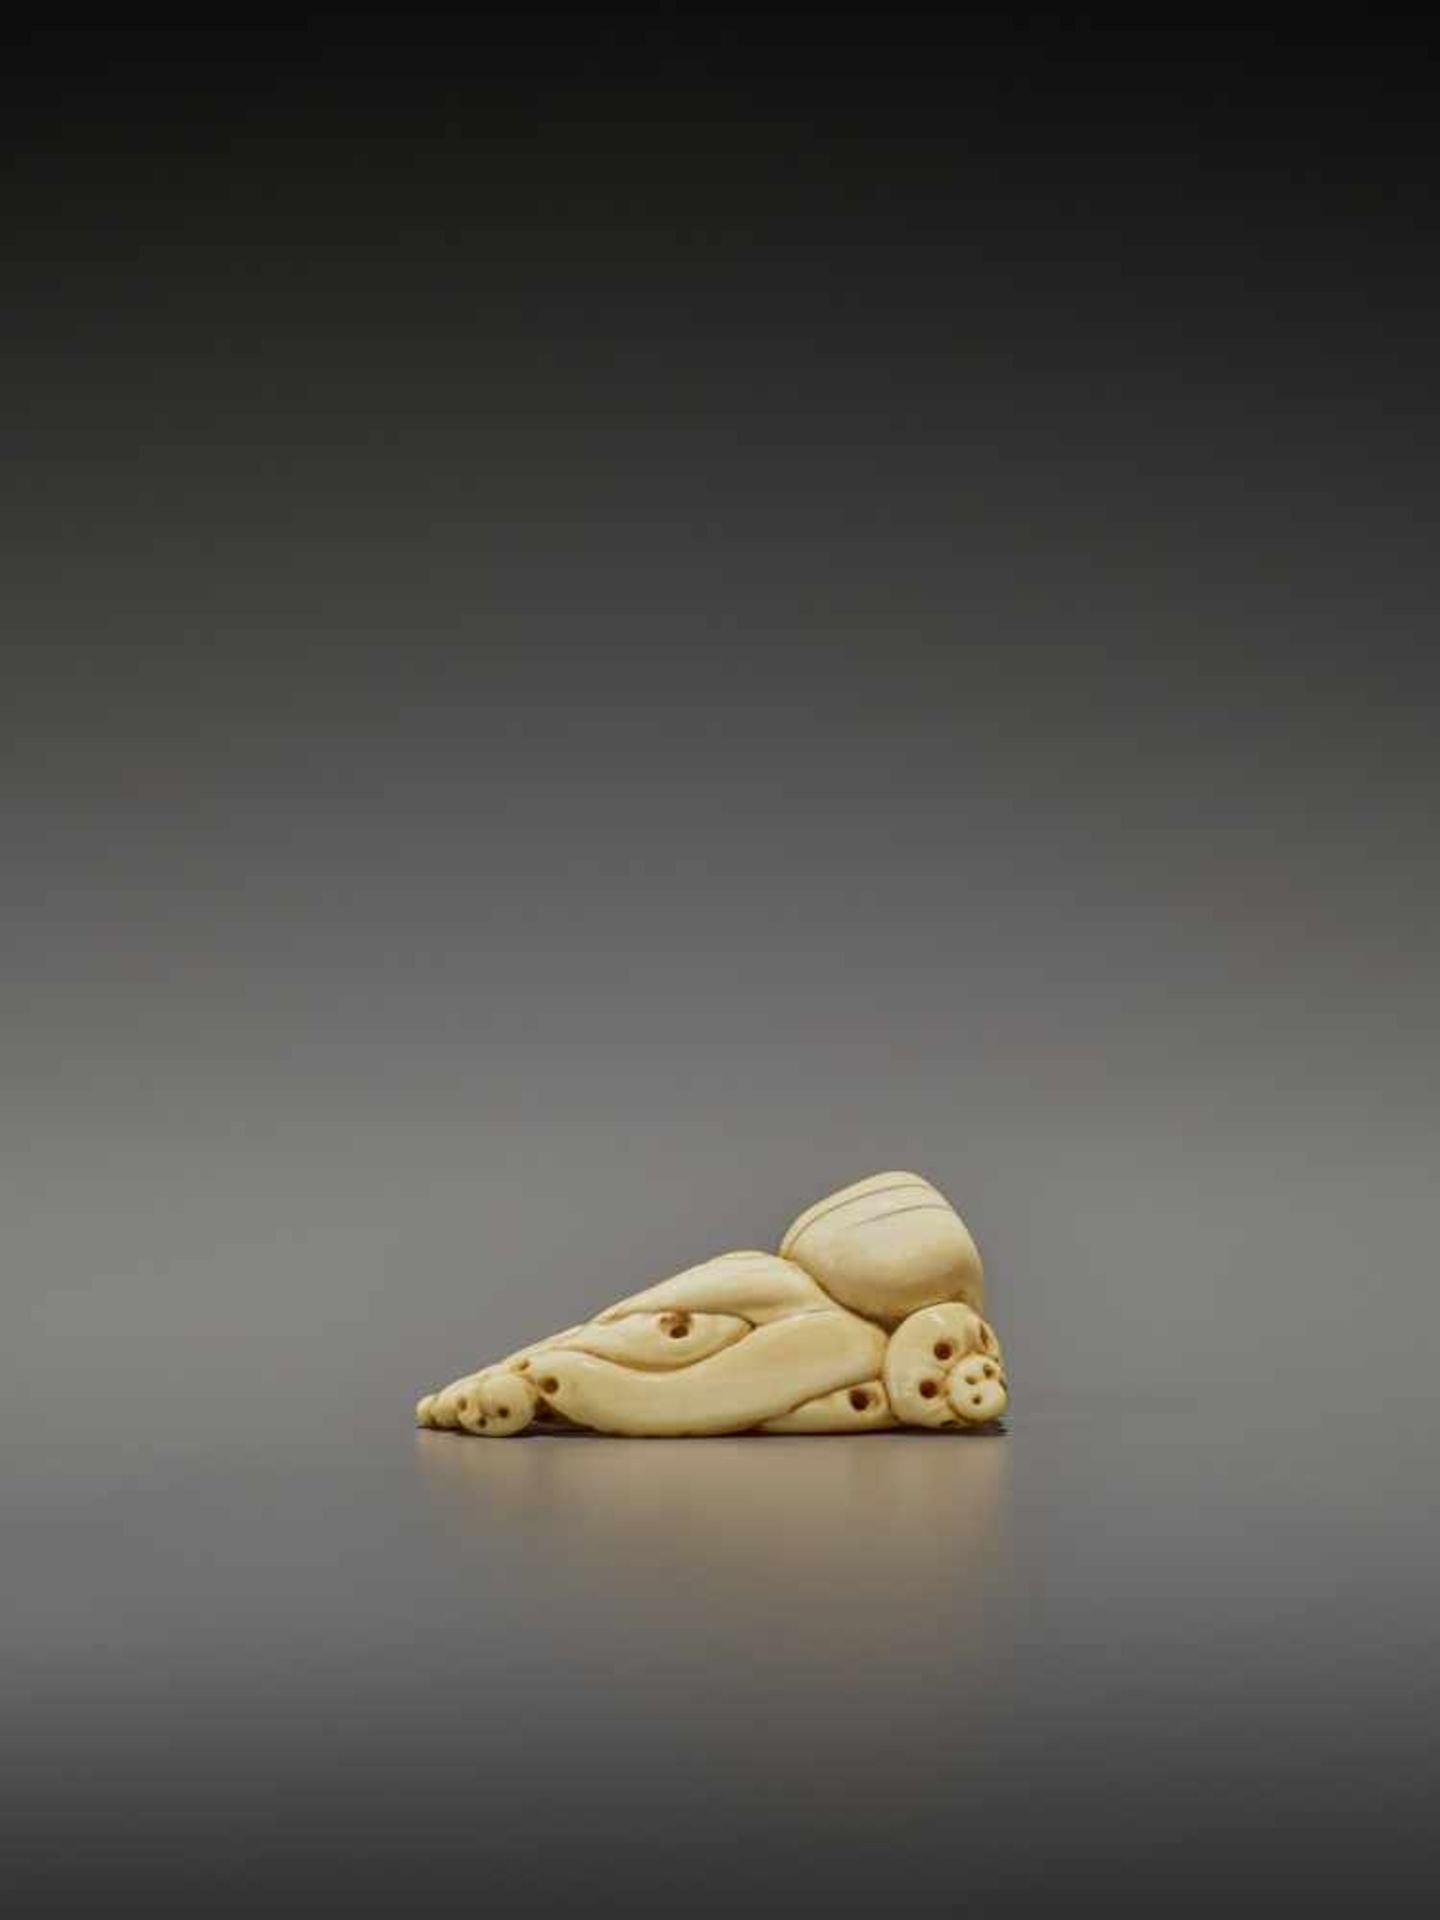 A RARE IVORY NETSUKE OF AN OCTOPUS UnsignedJapan, early 19th century, Edo period (1615-1868)The - Image 9 of 11